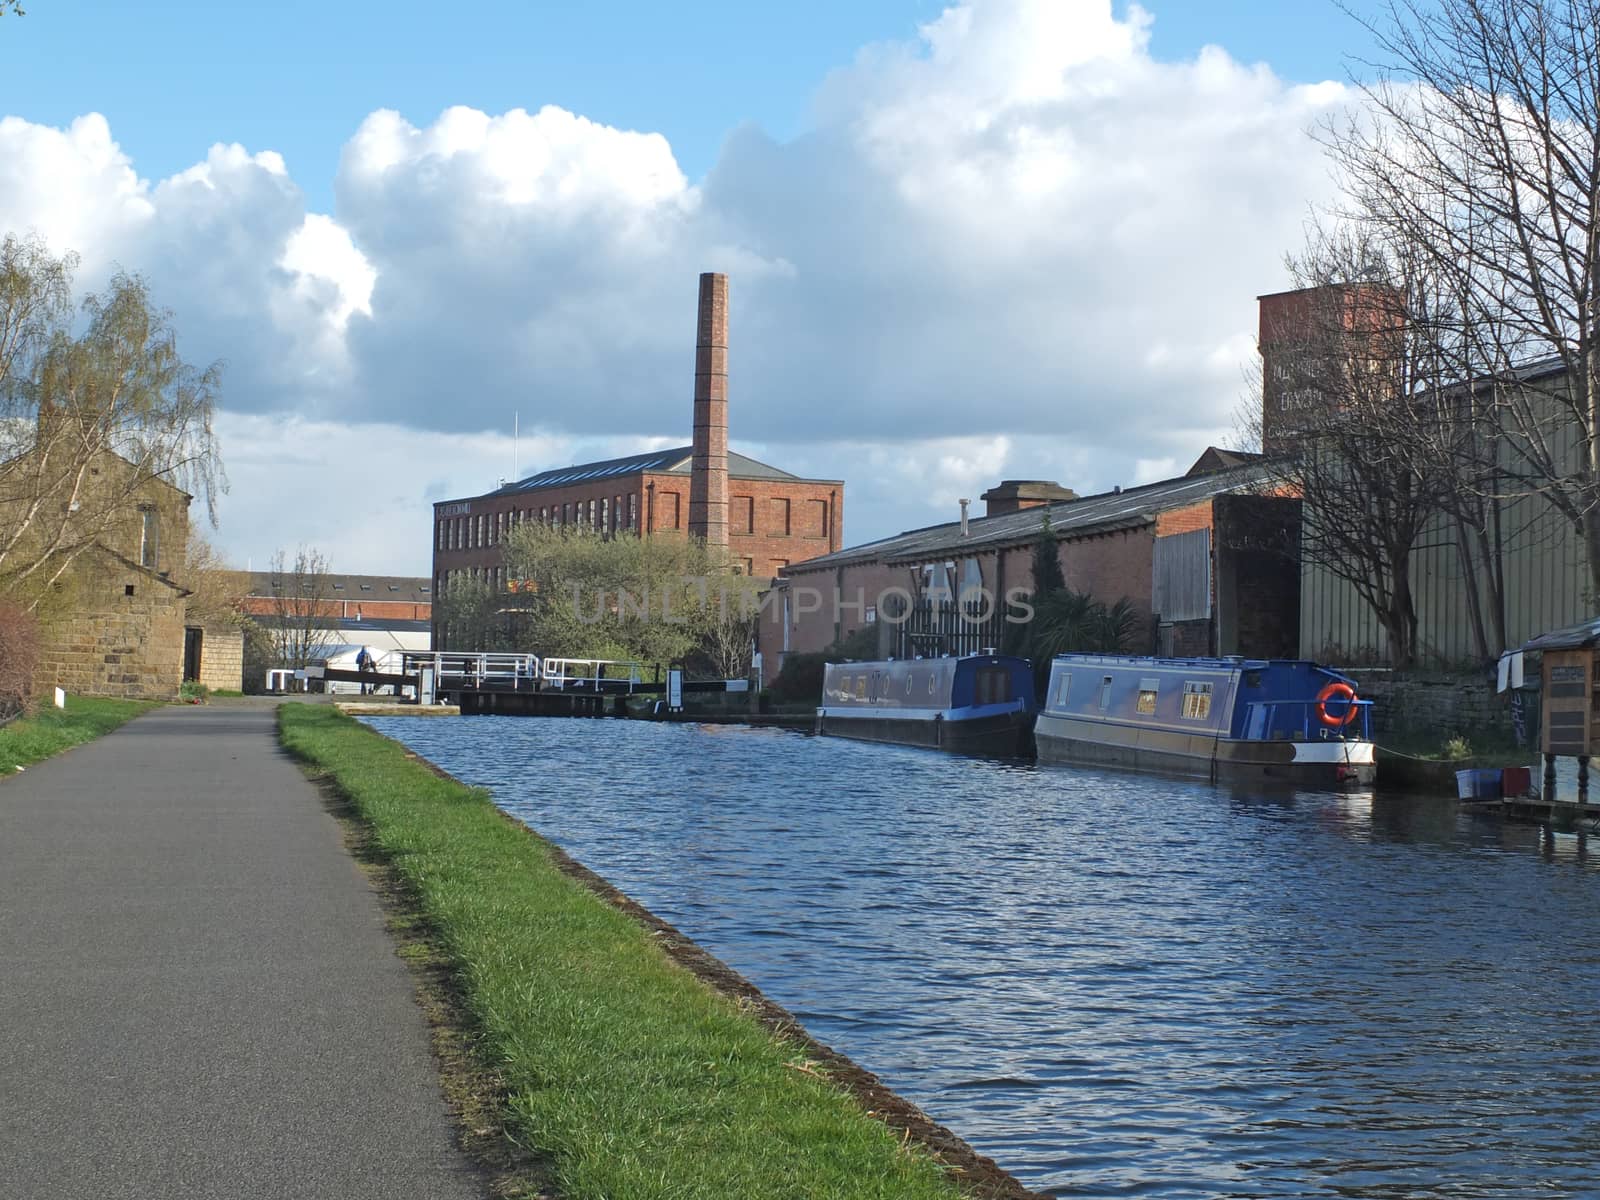 the historic castleton mill near armley in leeds and oddy lock gates and footbridge crossing the canal with moored houseboats by philopenshaw